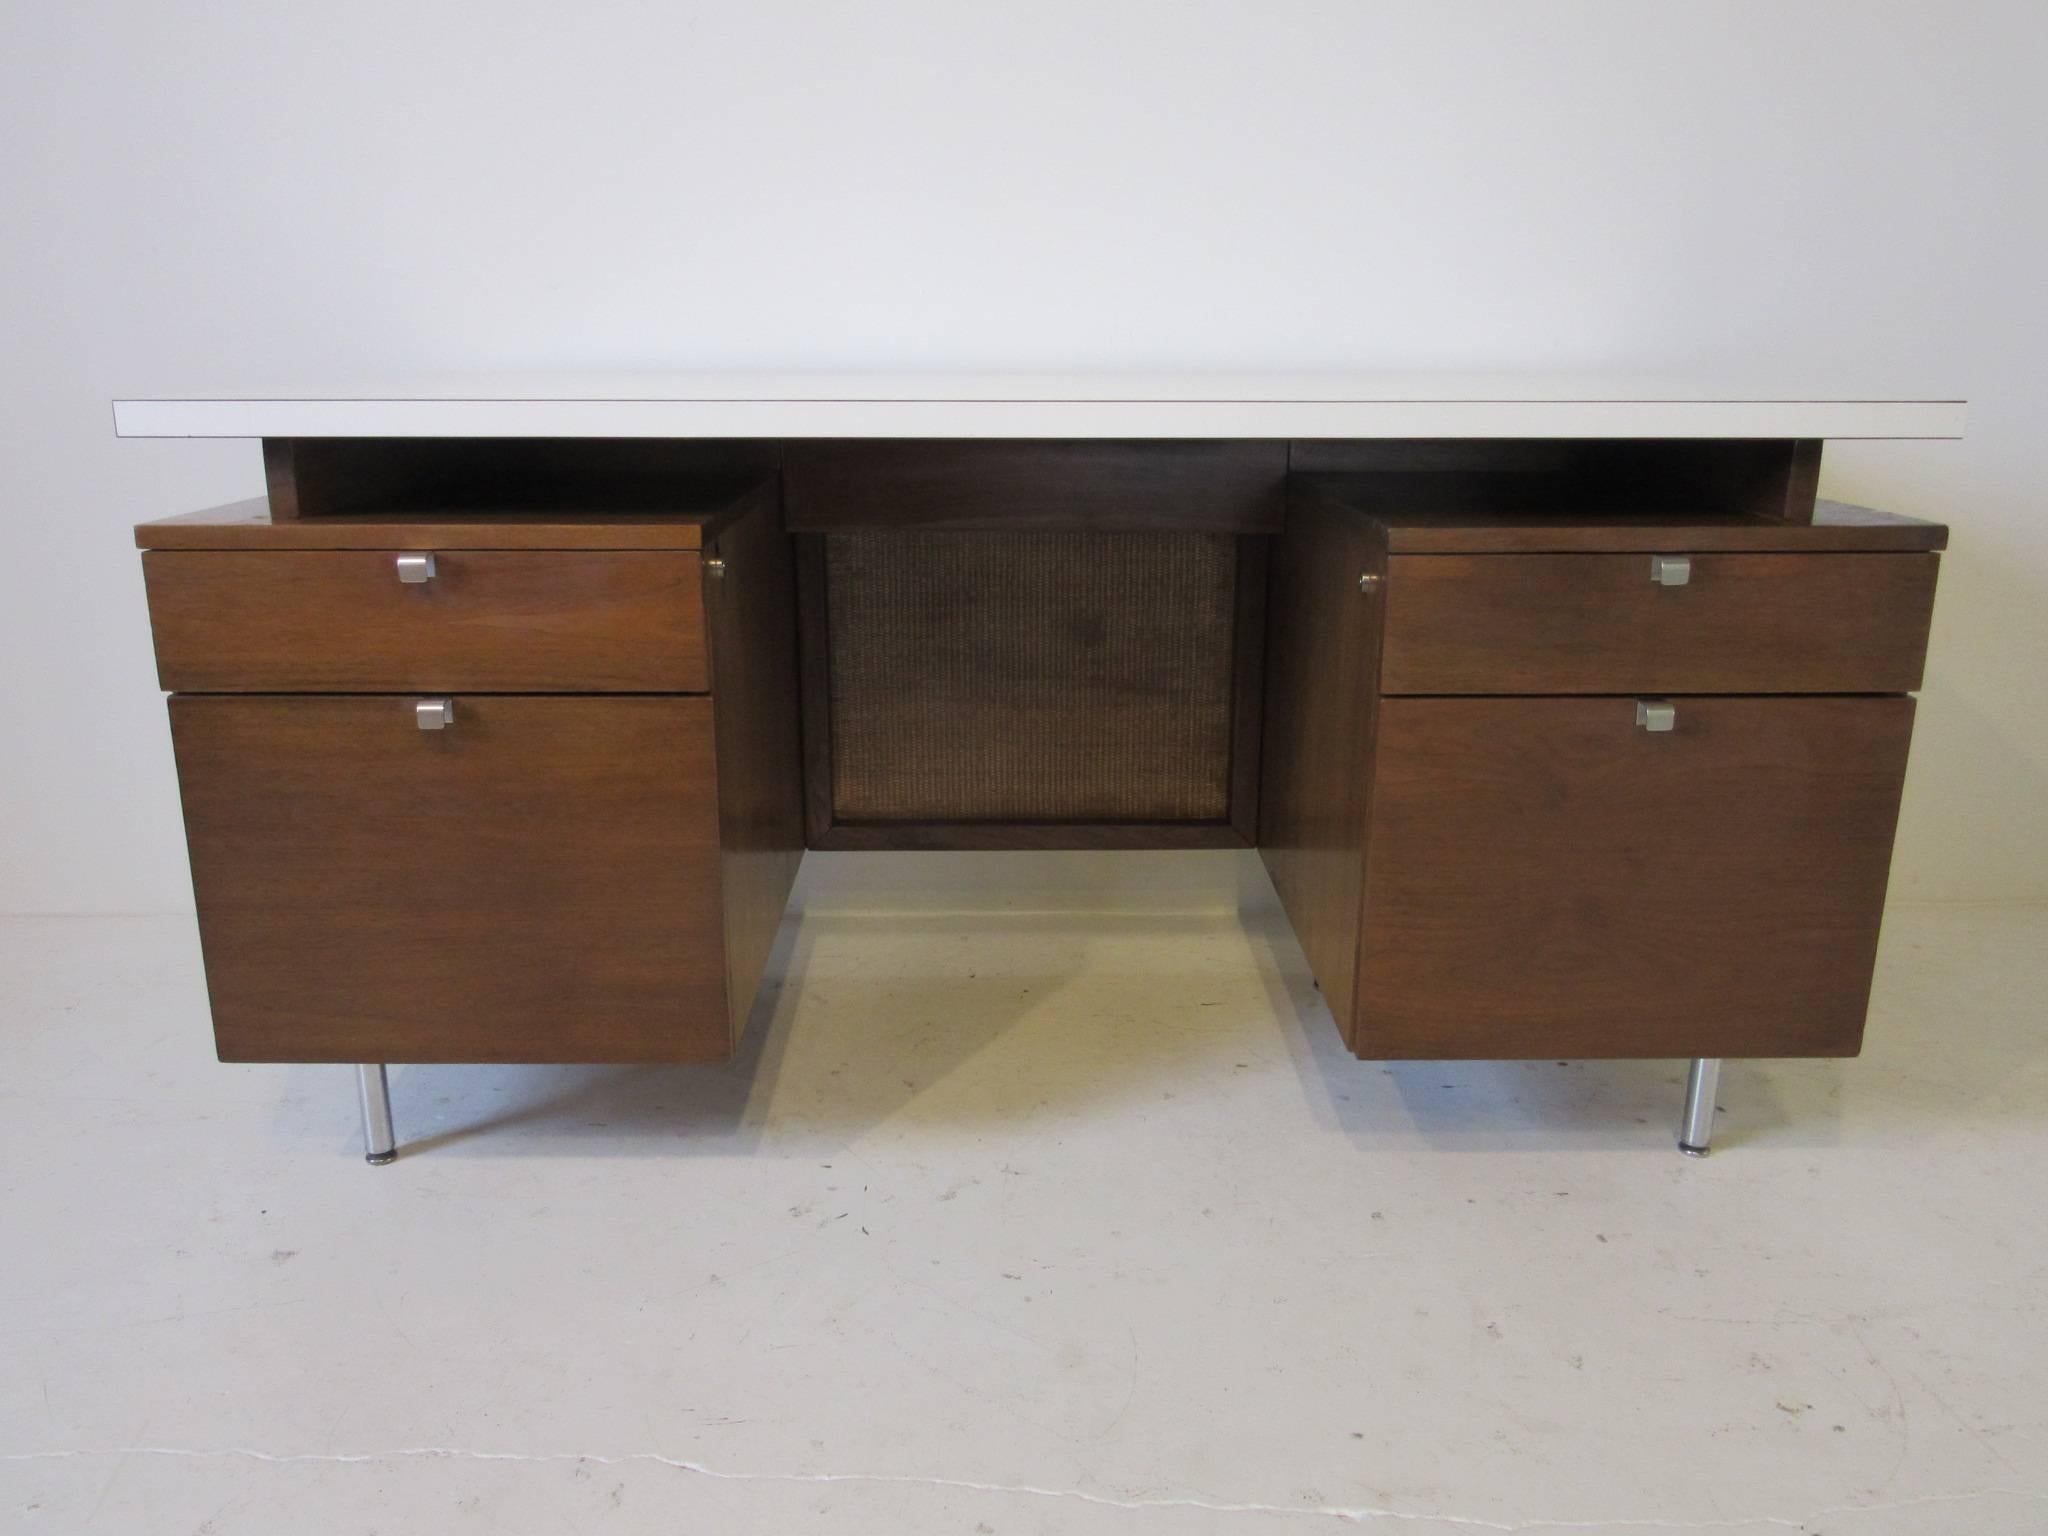 A two-piece desk and work station set designed by George Nelson for the Irwin Union Bank by Eero Saarinen in the town of Columbus Indiana noted for its concentration of world famous architectural buildings. These were custom-made to order by Nelson